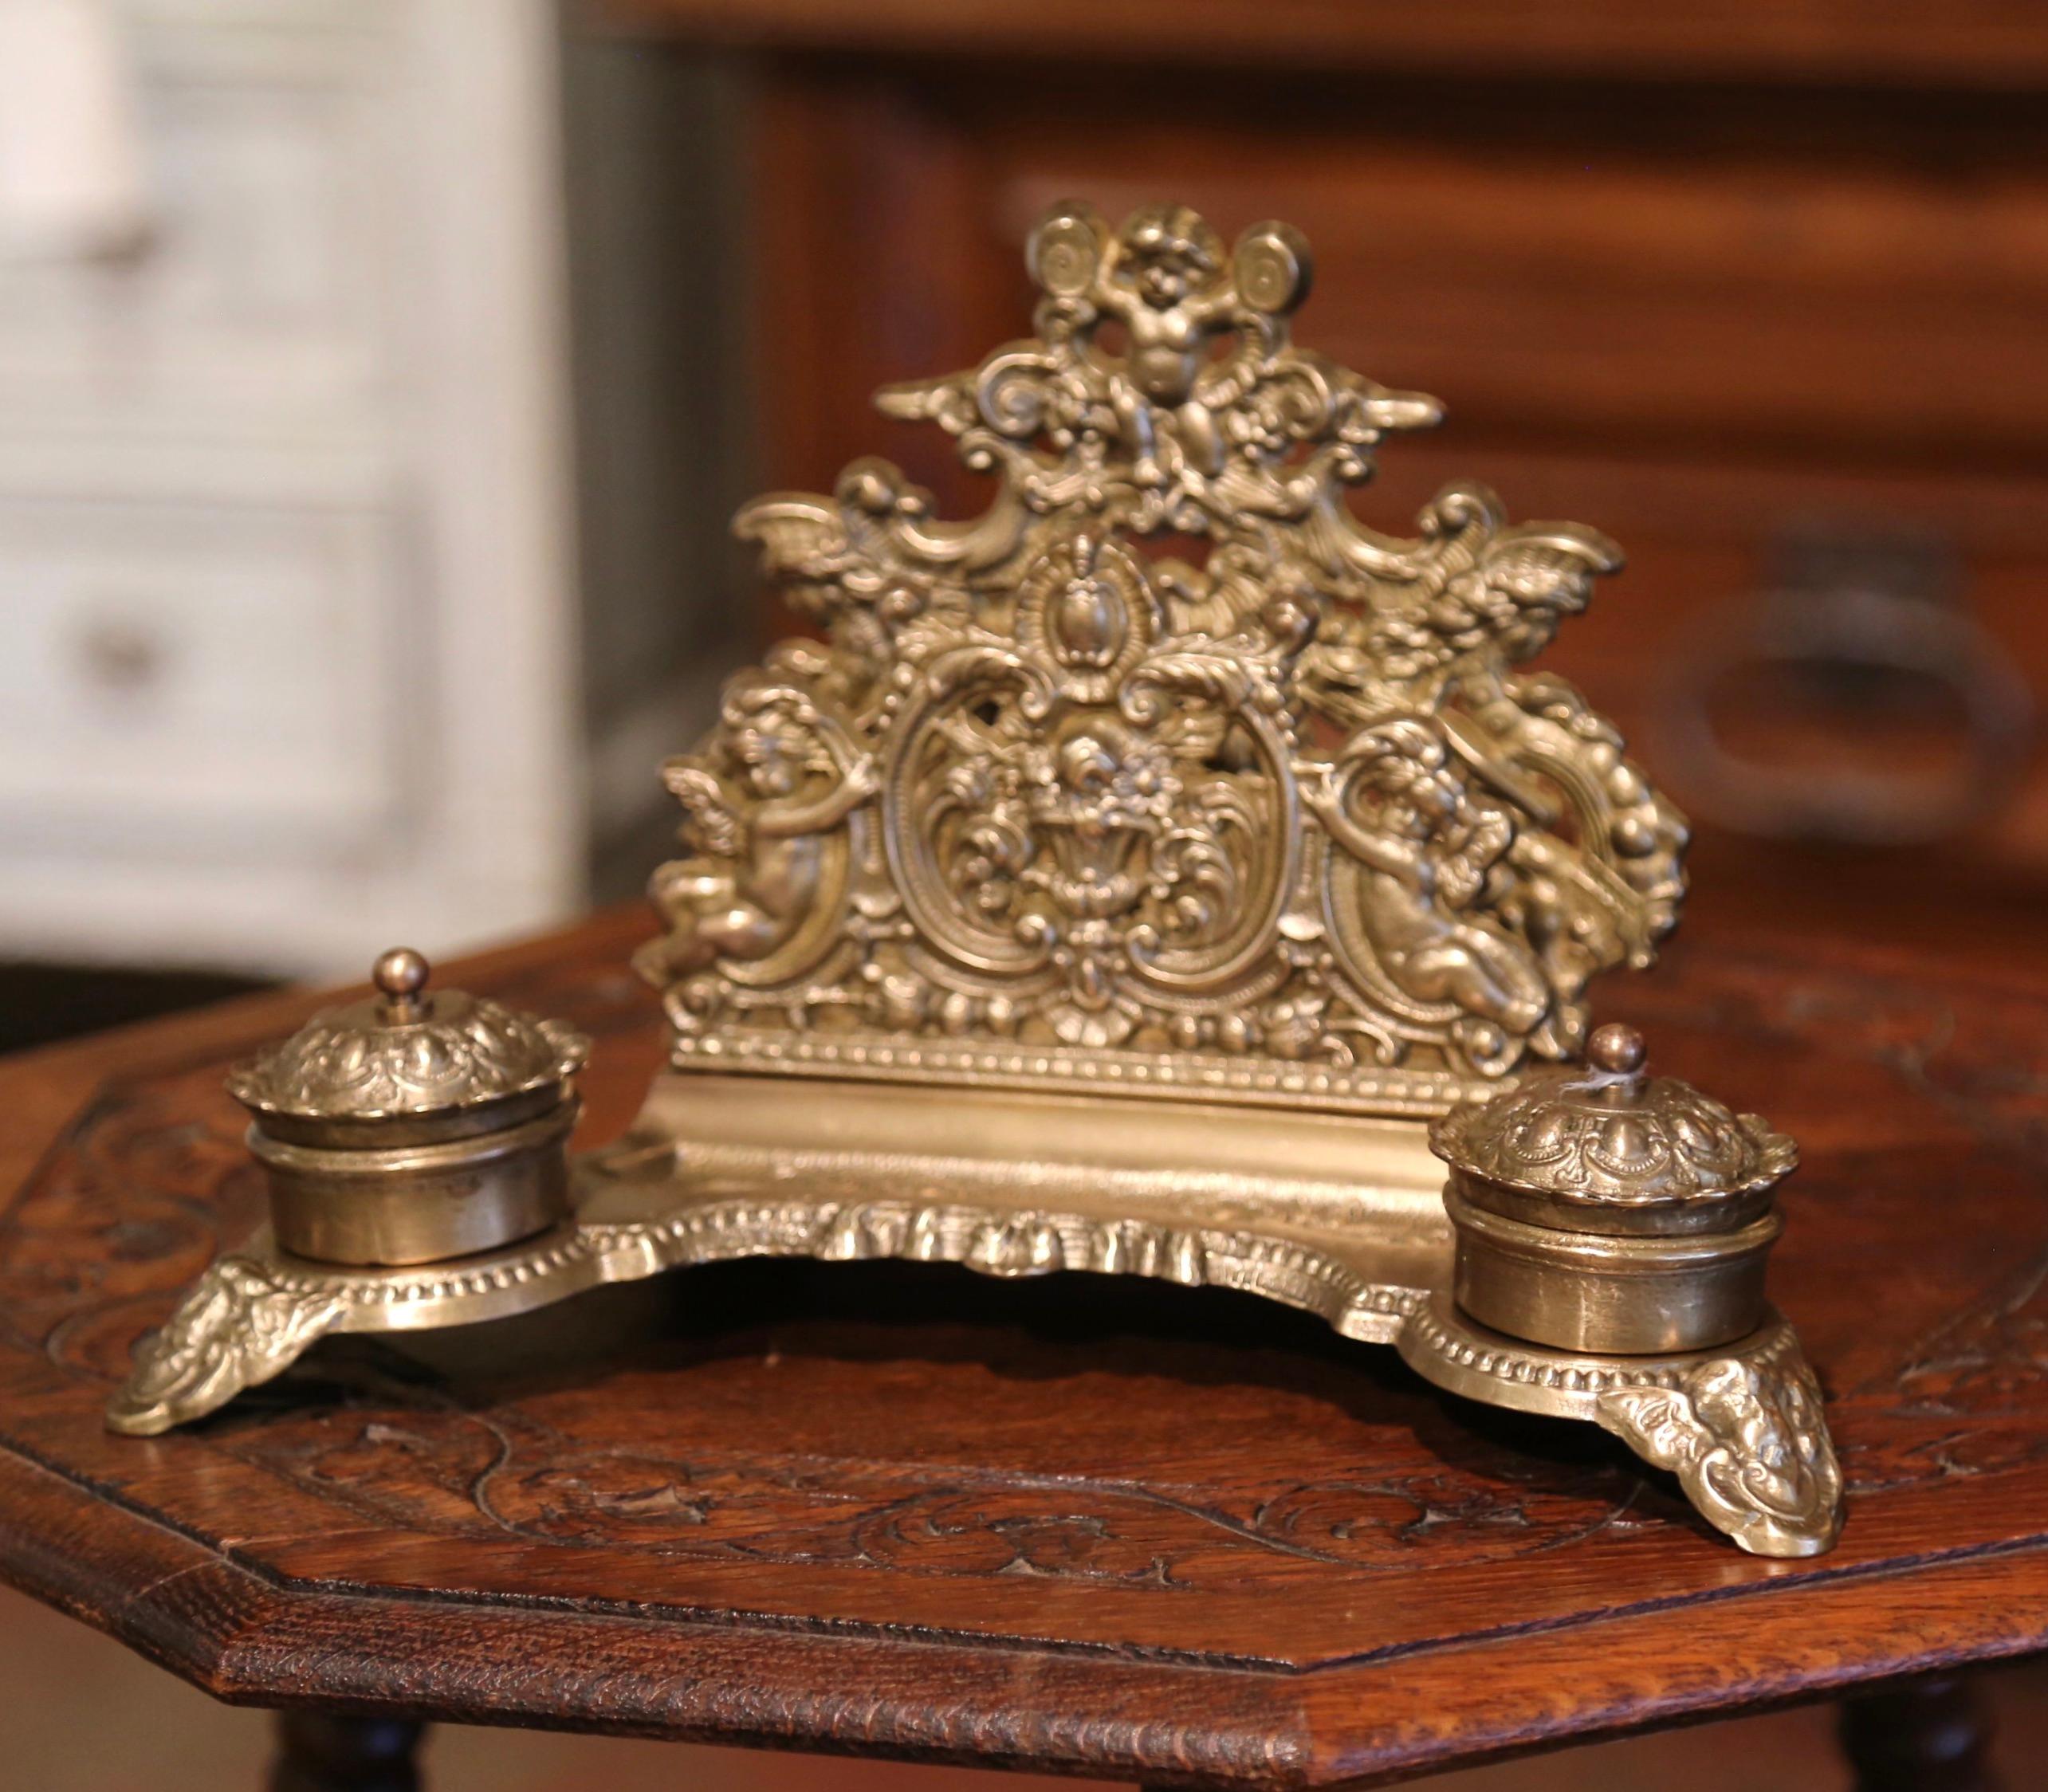 Decorate a man's desk or study with this elegant antique inkwell; crafted in Belgium, circa 1880, the desk accessory stands on scroll feet over a scalloped apron, and features intricate repousse decor including a deep curve at the front for pen